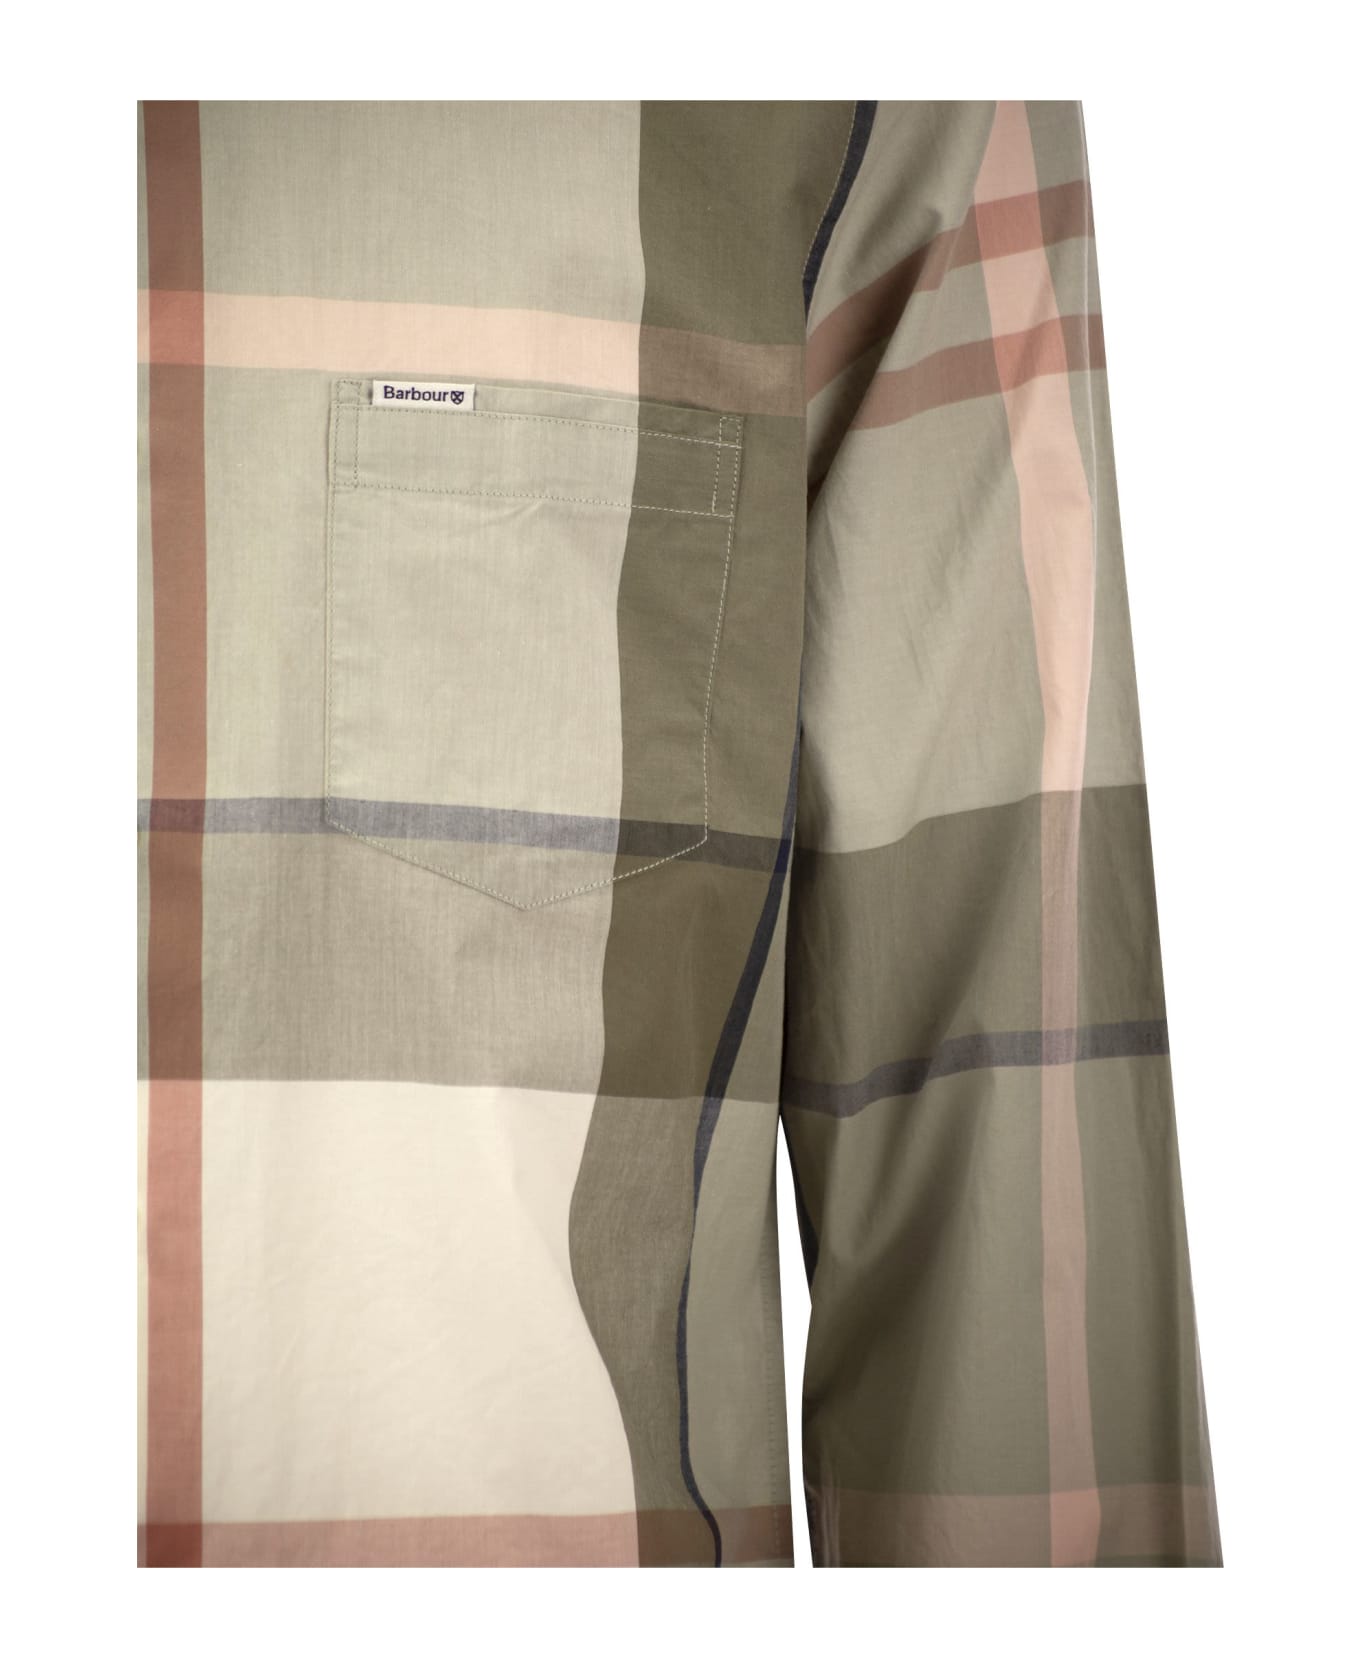 Barbour Harris - Plaid Tailored Shirt - Olive Green シャツ